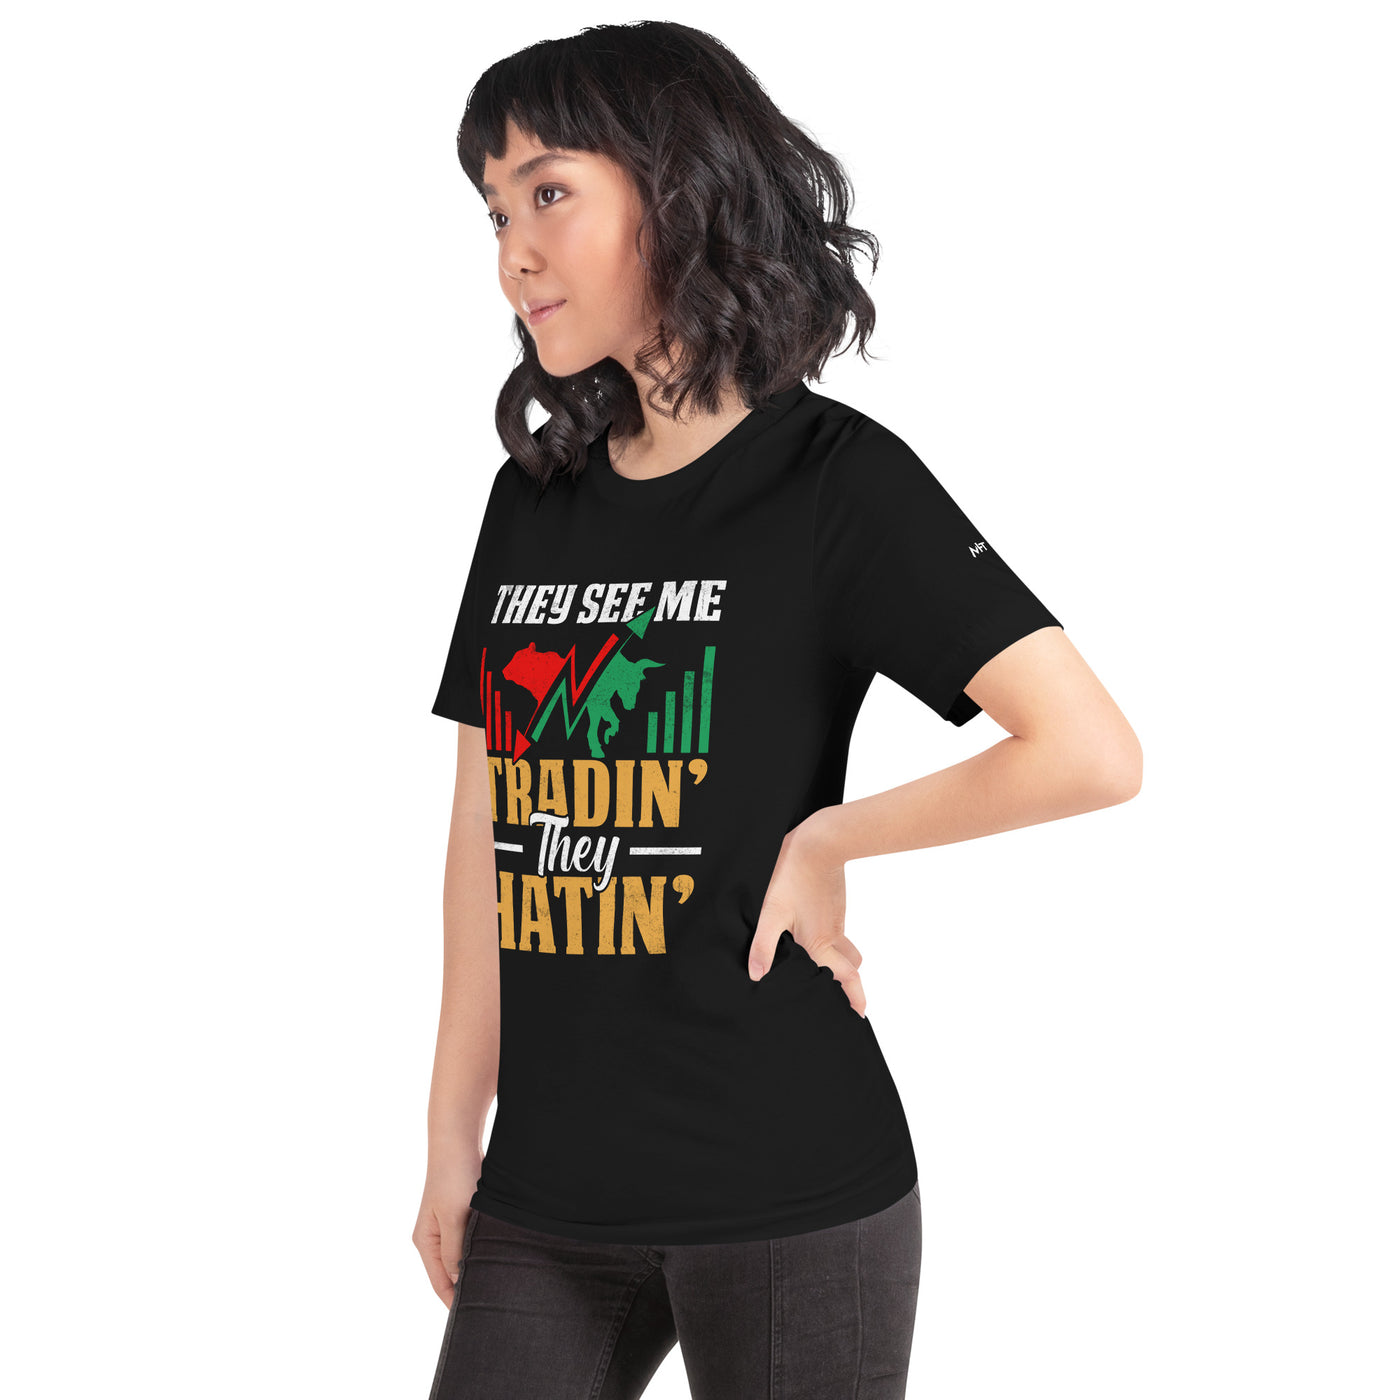 They See me Trading, they Hating -  Unisex t-shirt